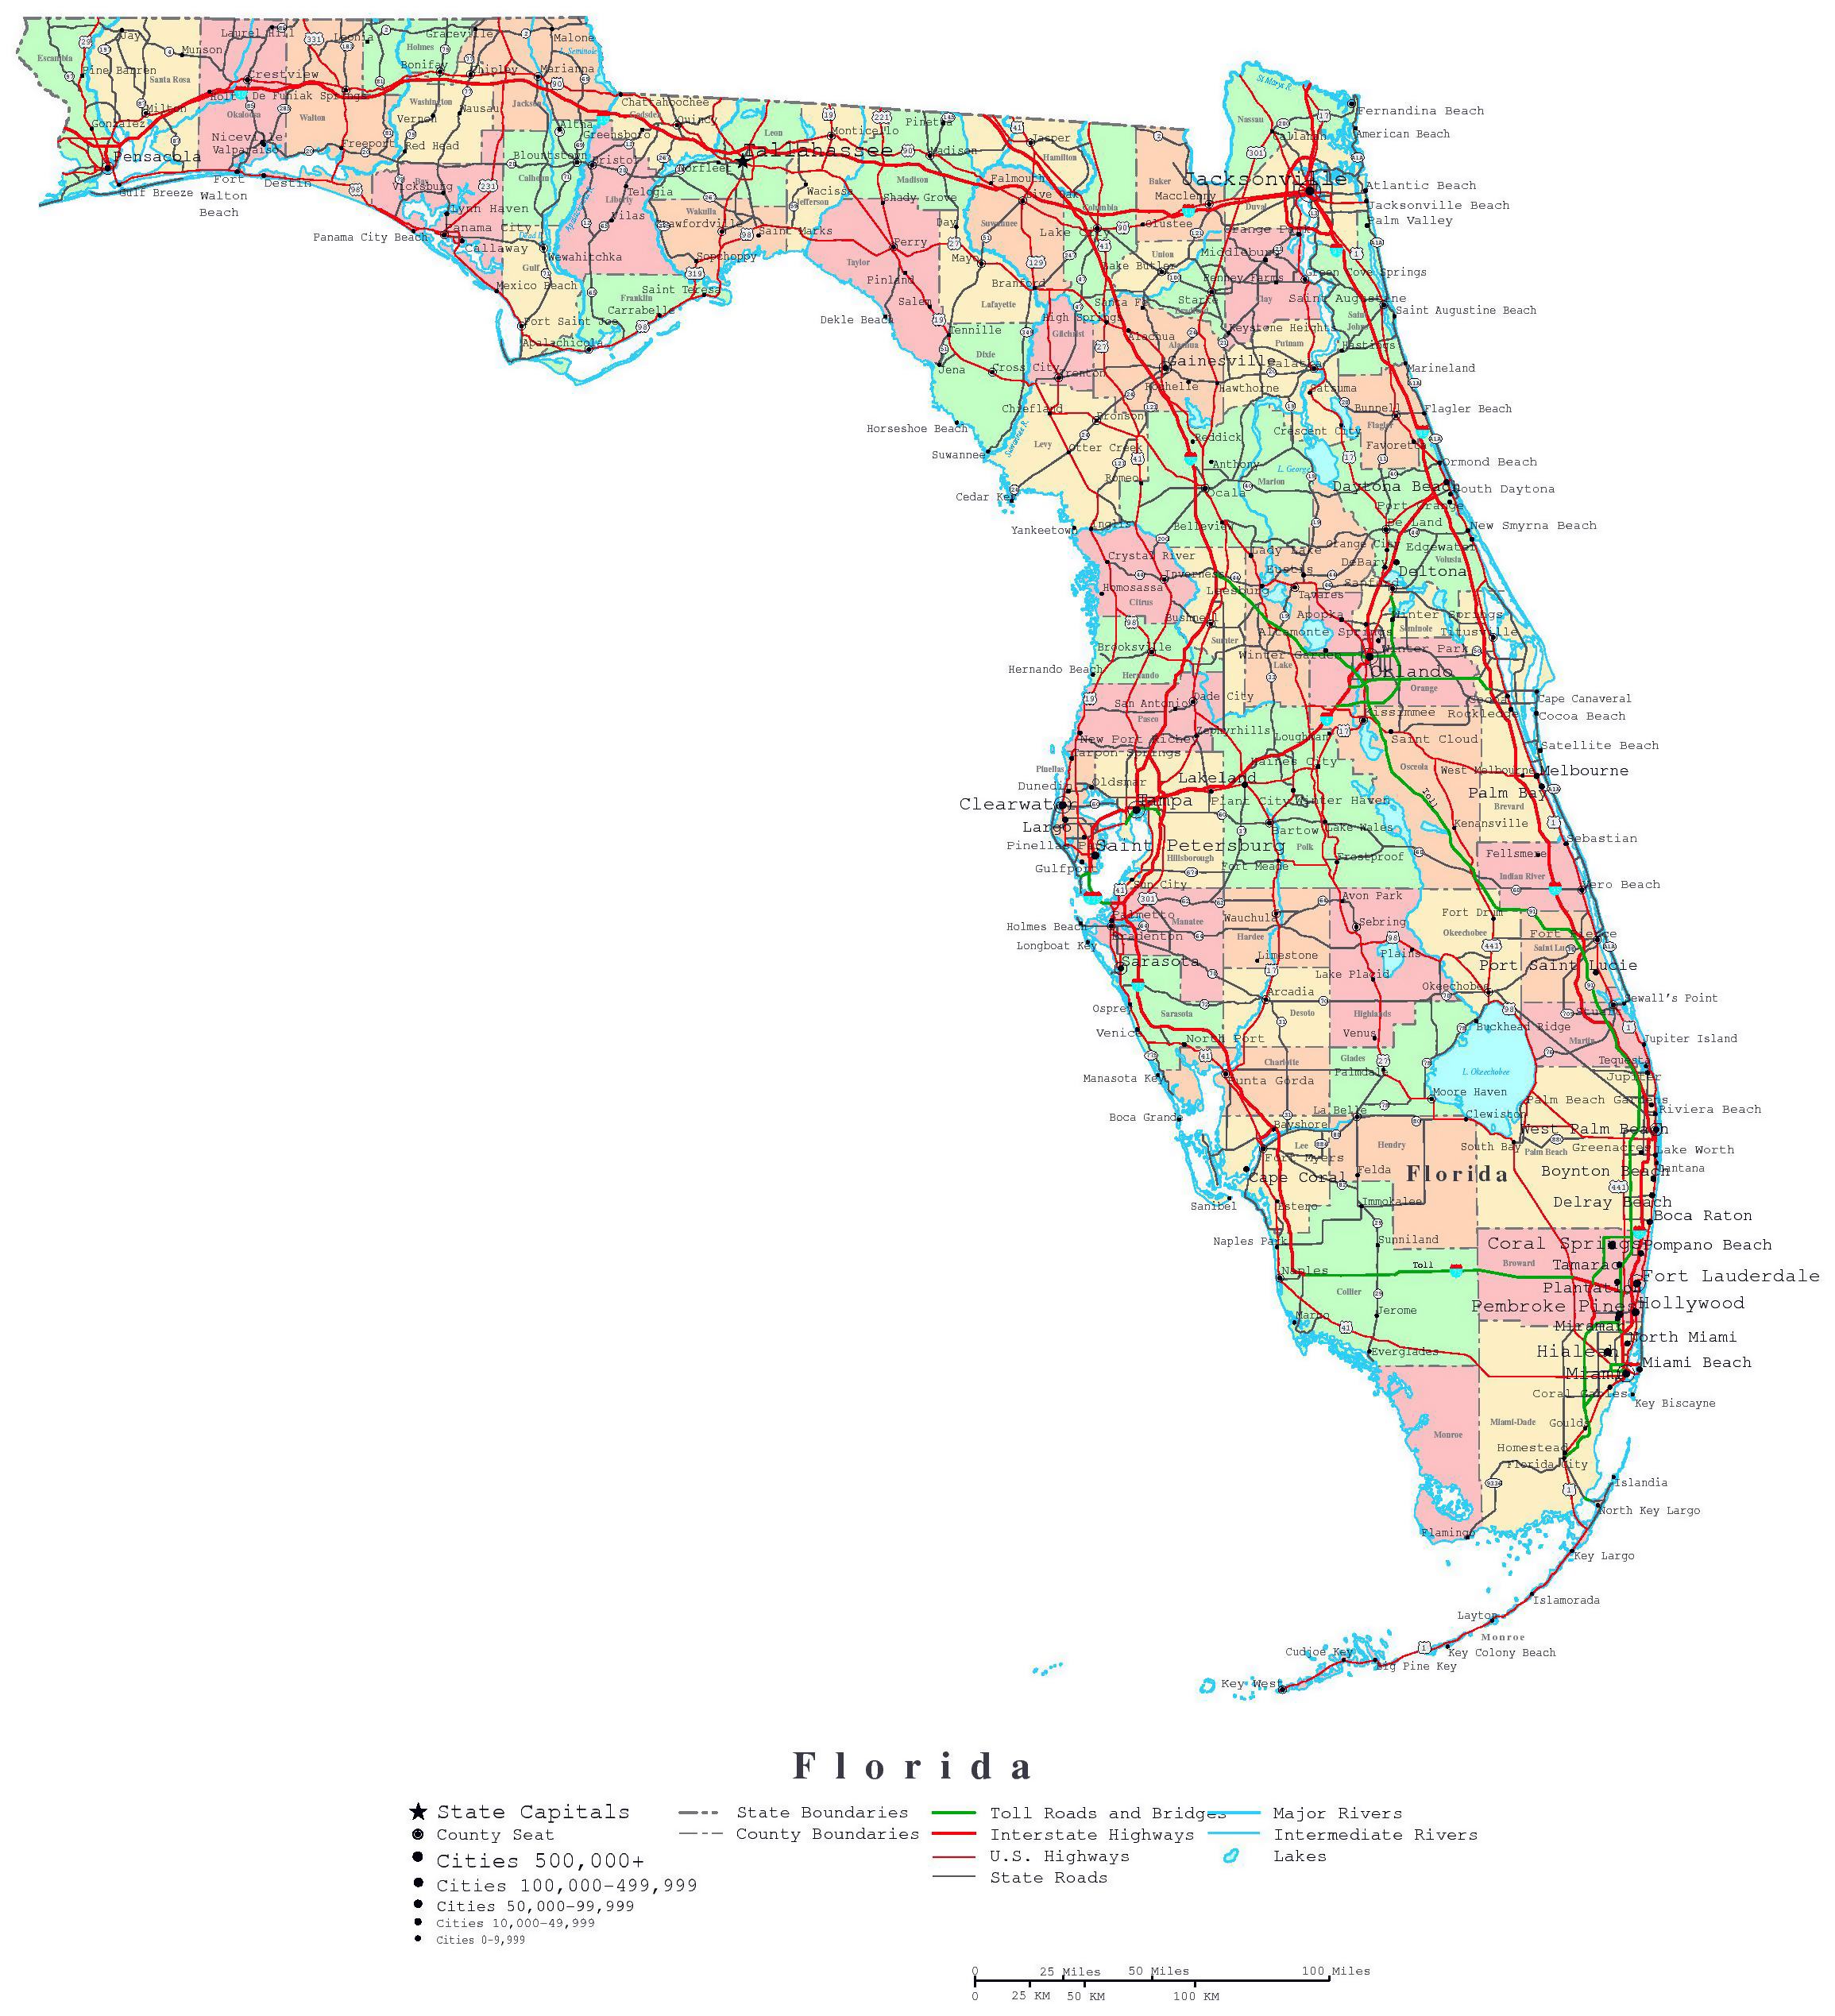 large-detailed-administrative-map-of-florida-state-with-roads-highways